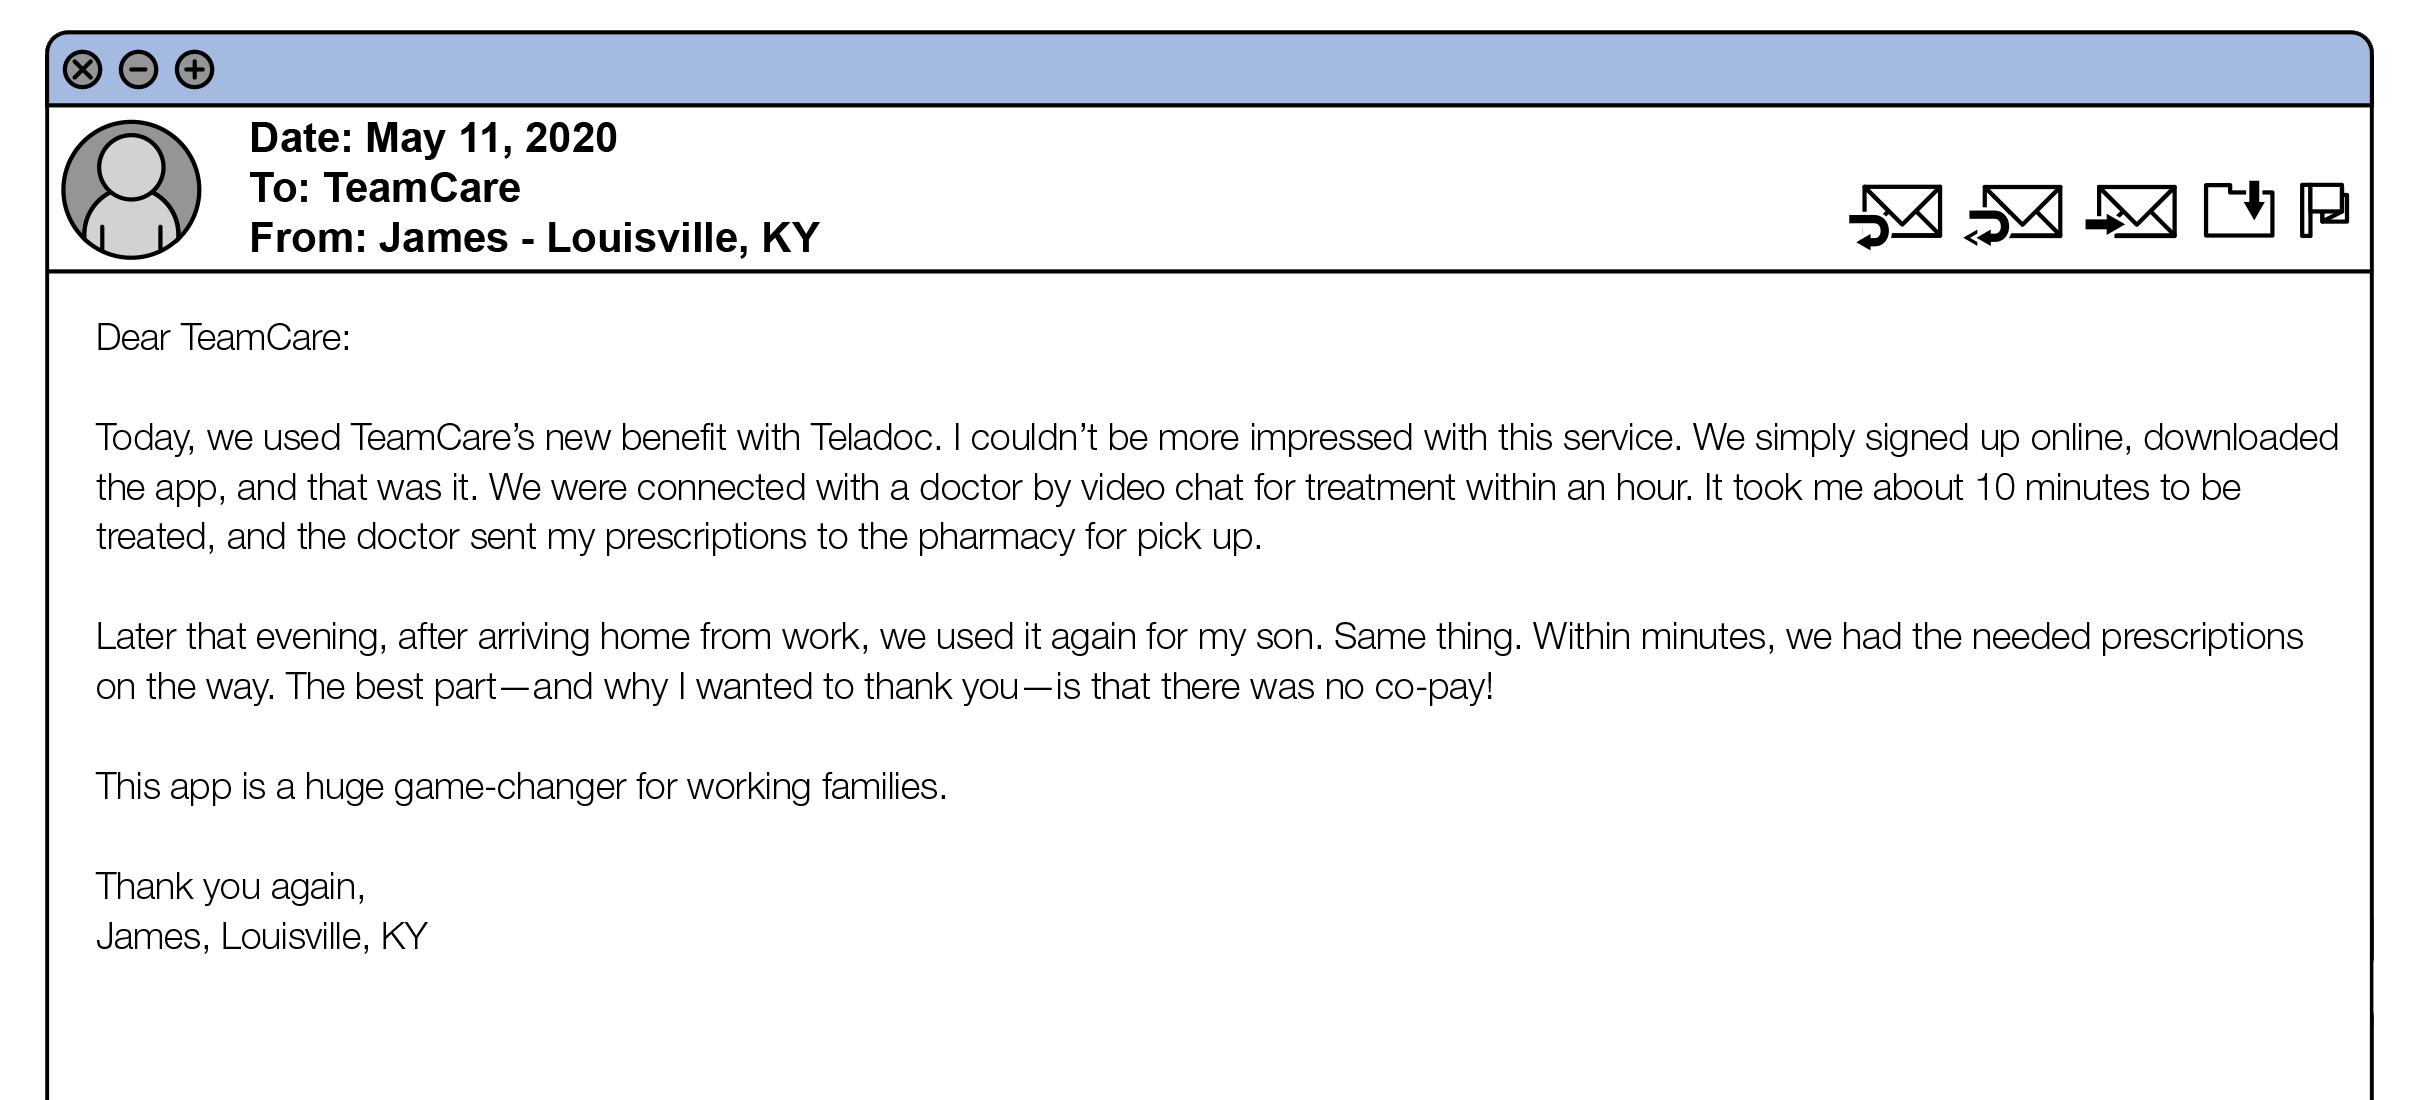 Positive member testimonial email about Teladoc services